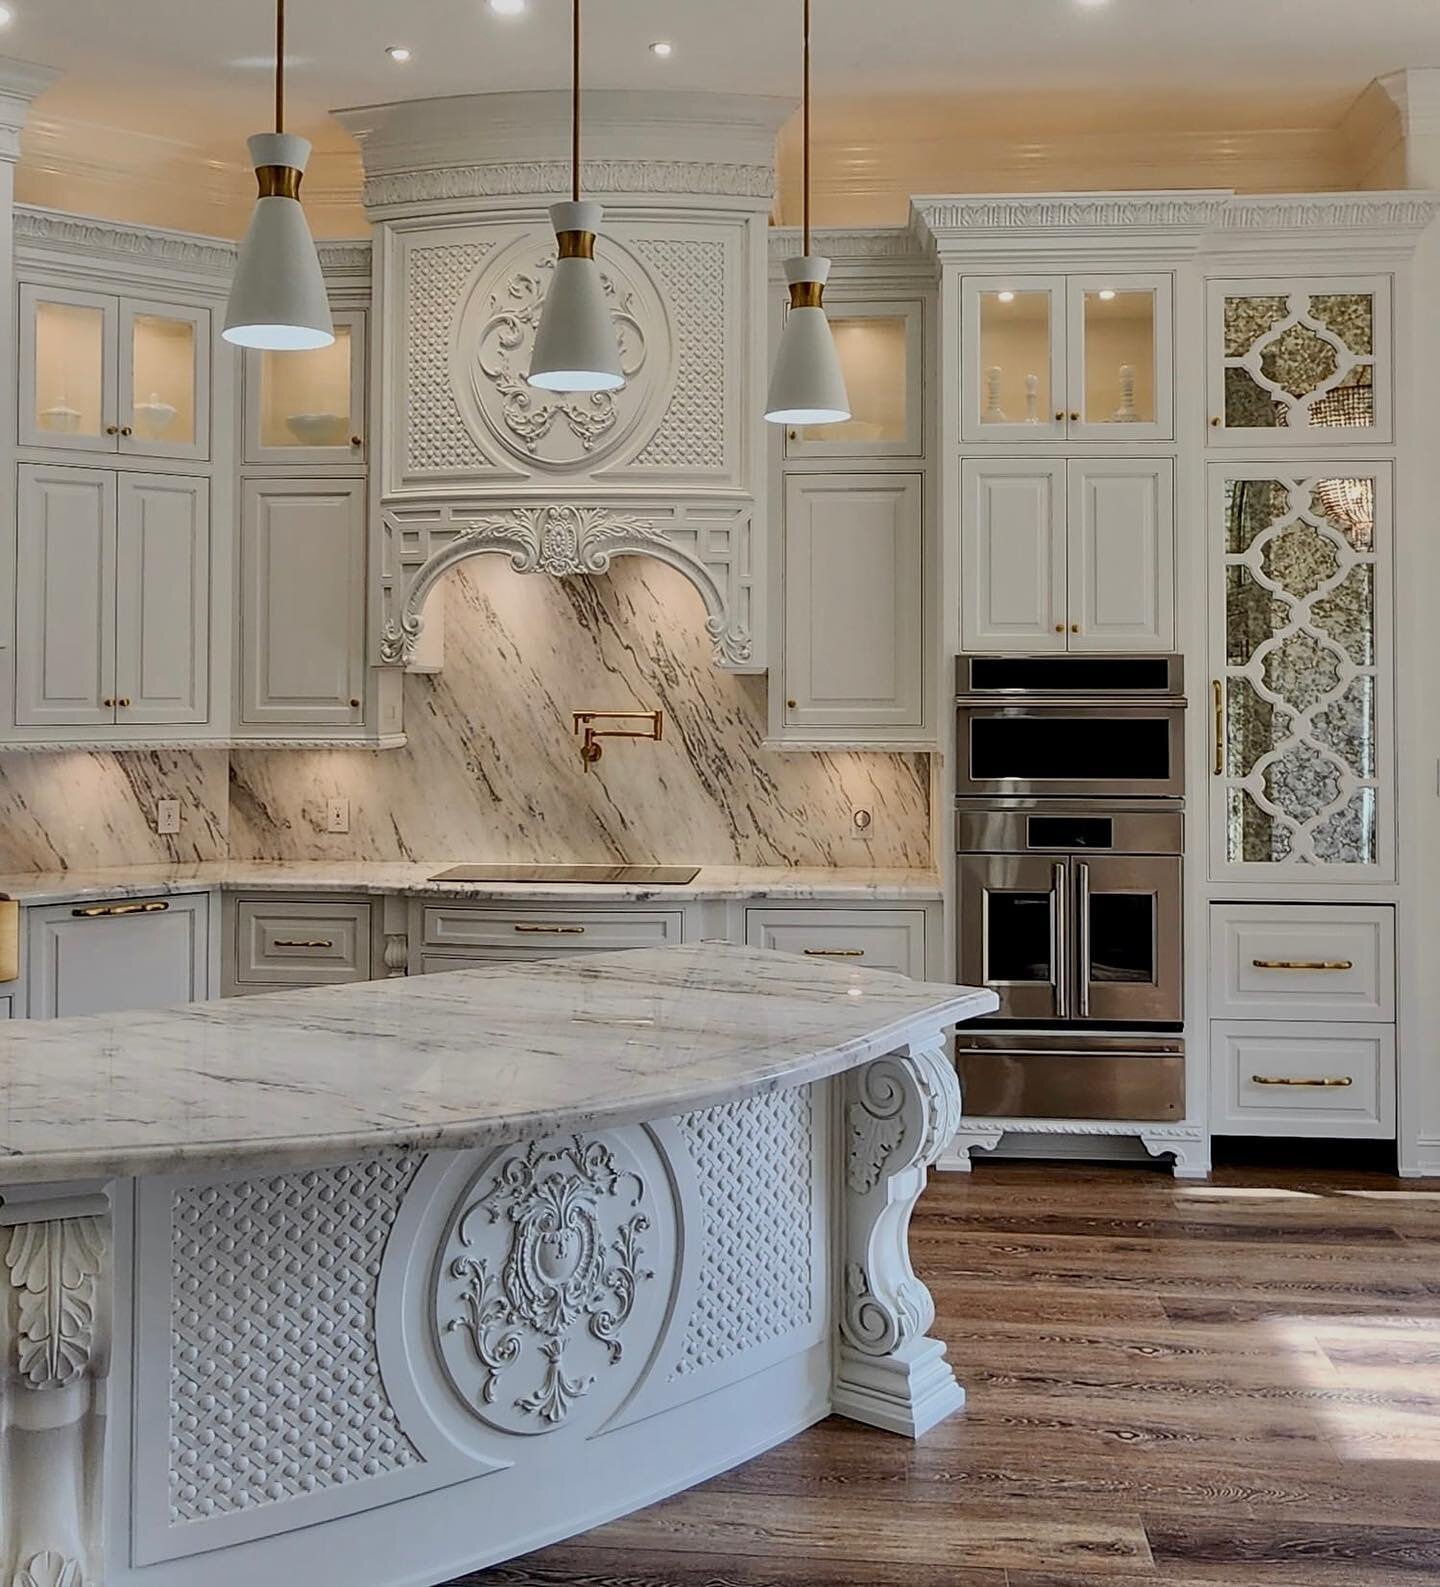 Elevated culinary experiences can be achieved through our beautifully designed kitchen cabinets.

Schedule an appointment today to begin your dream home journey 

Phone: (409) 332-1039
Email: wendy@wendalyndc.com
&bull;
&bull;
&bull;
&bull;
&bull;
&b